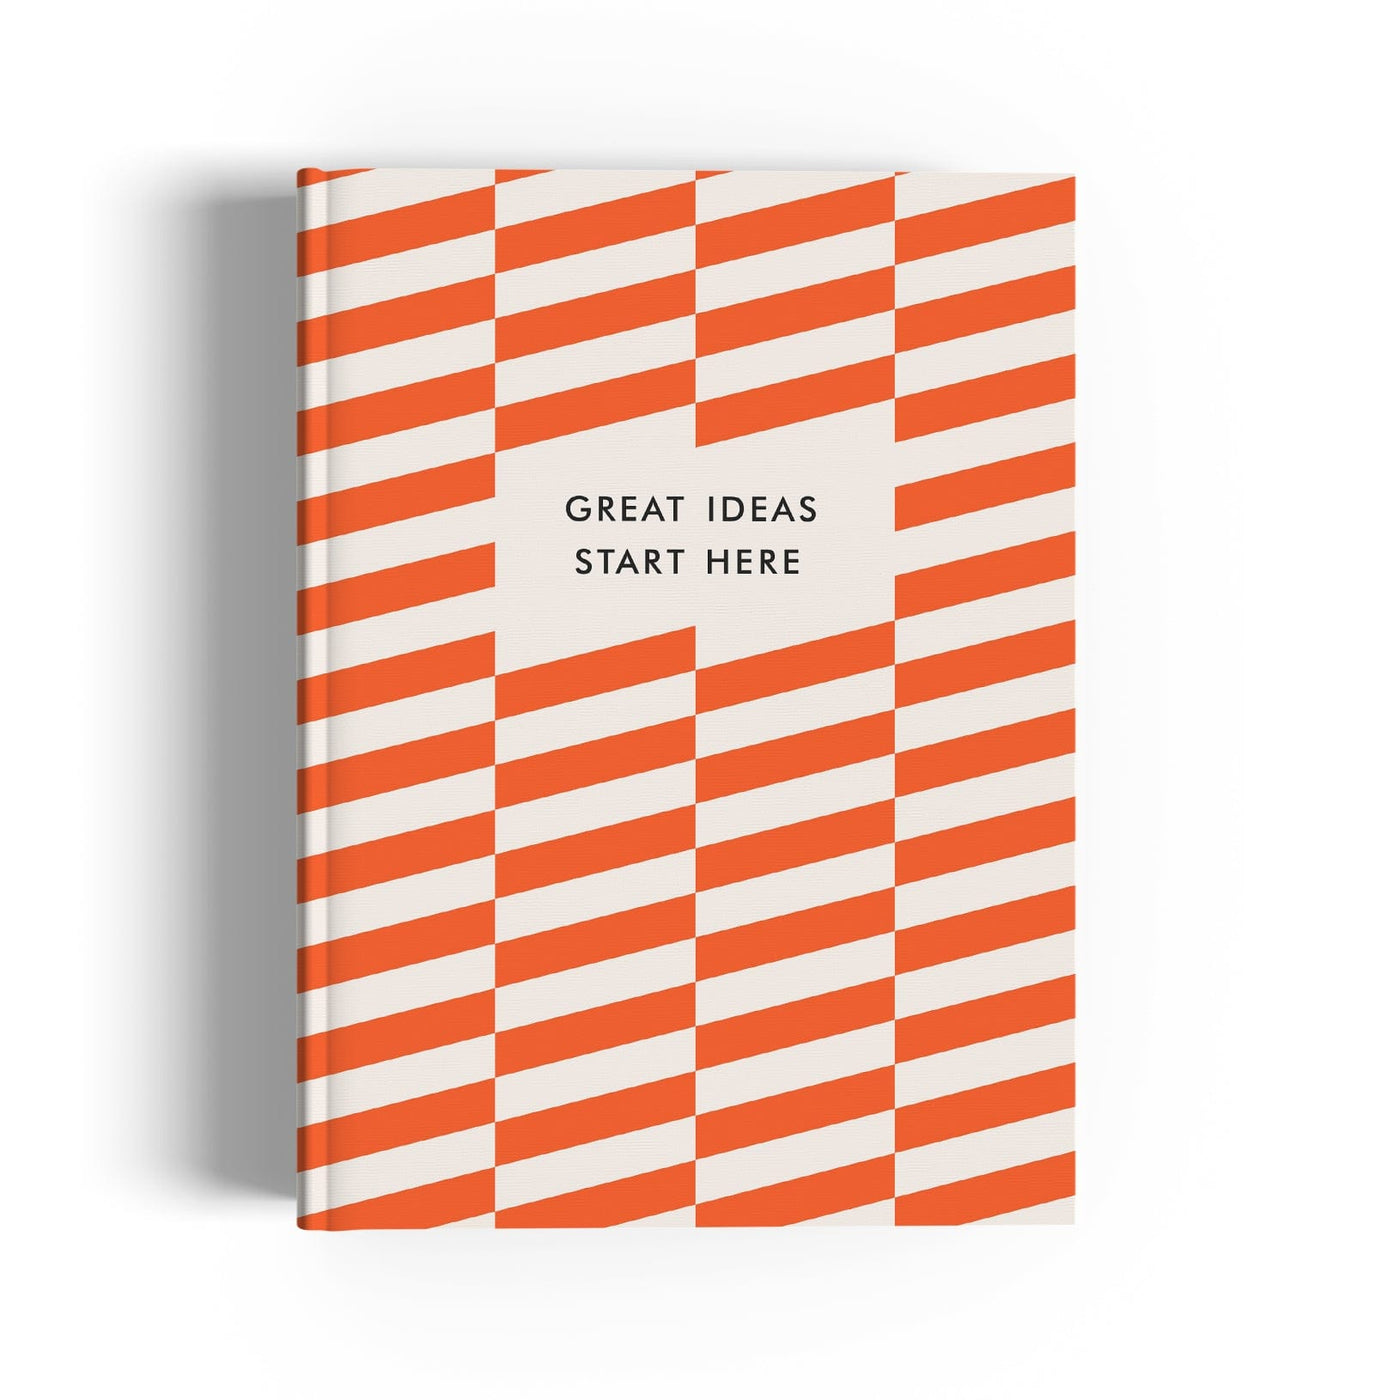 Great ideas Red A5 Notebook  160 pages